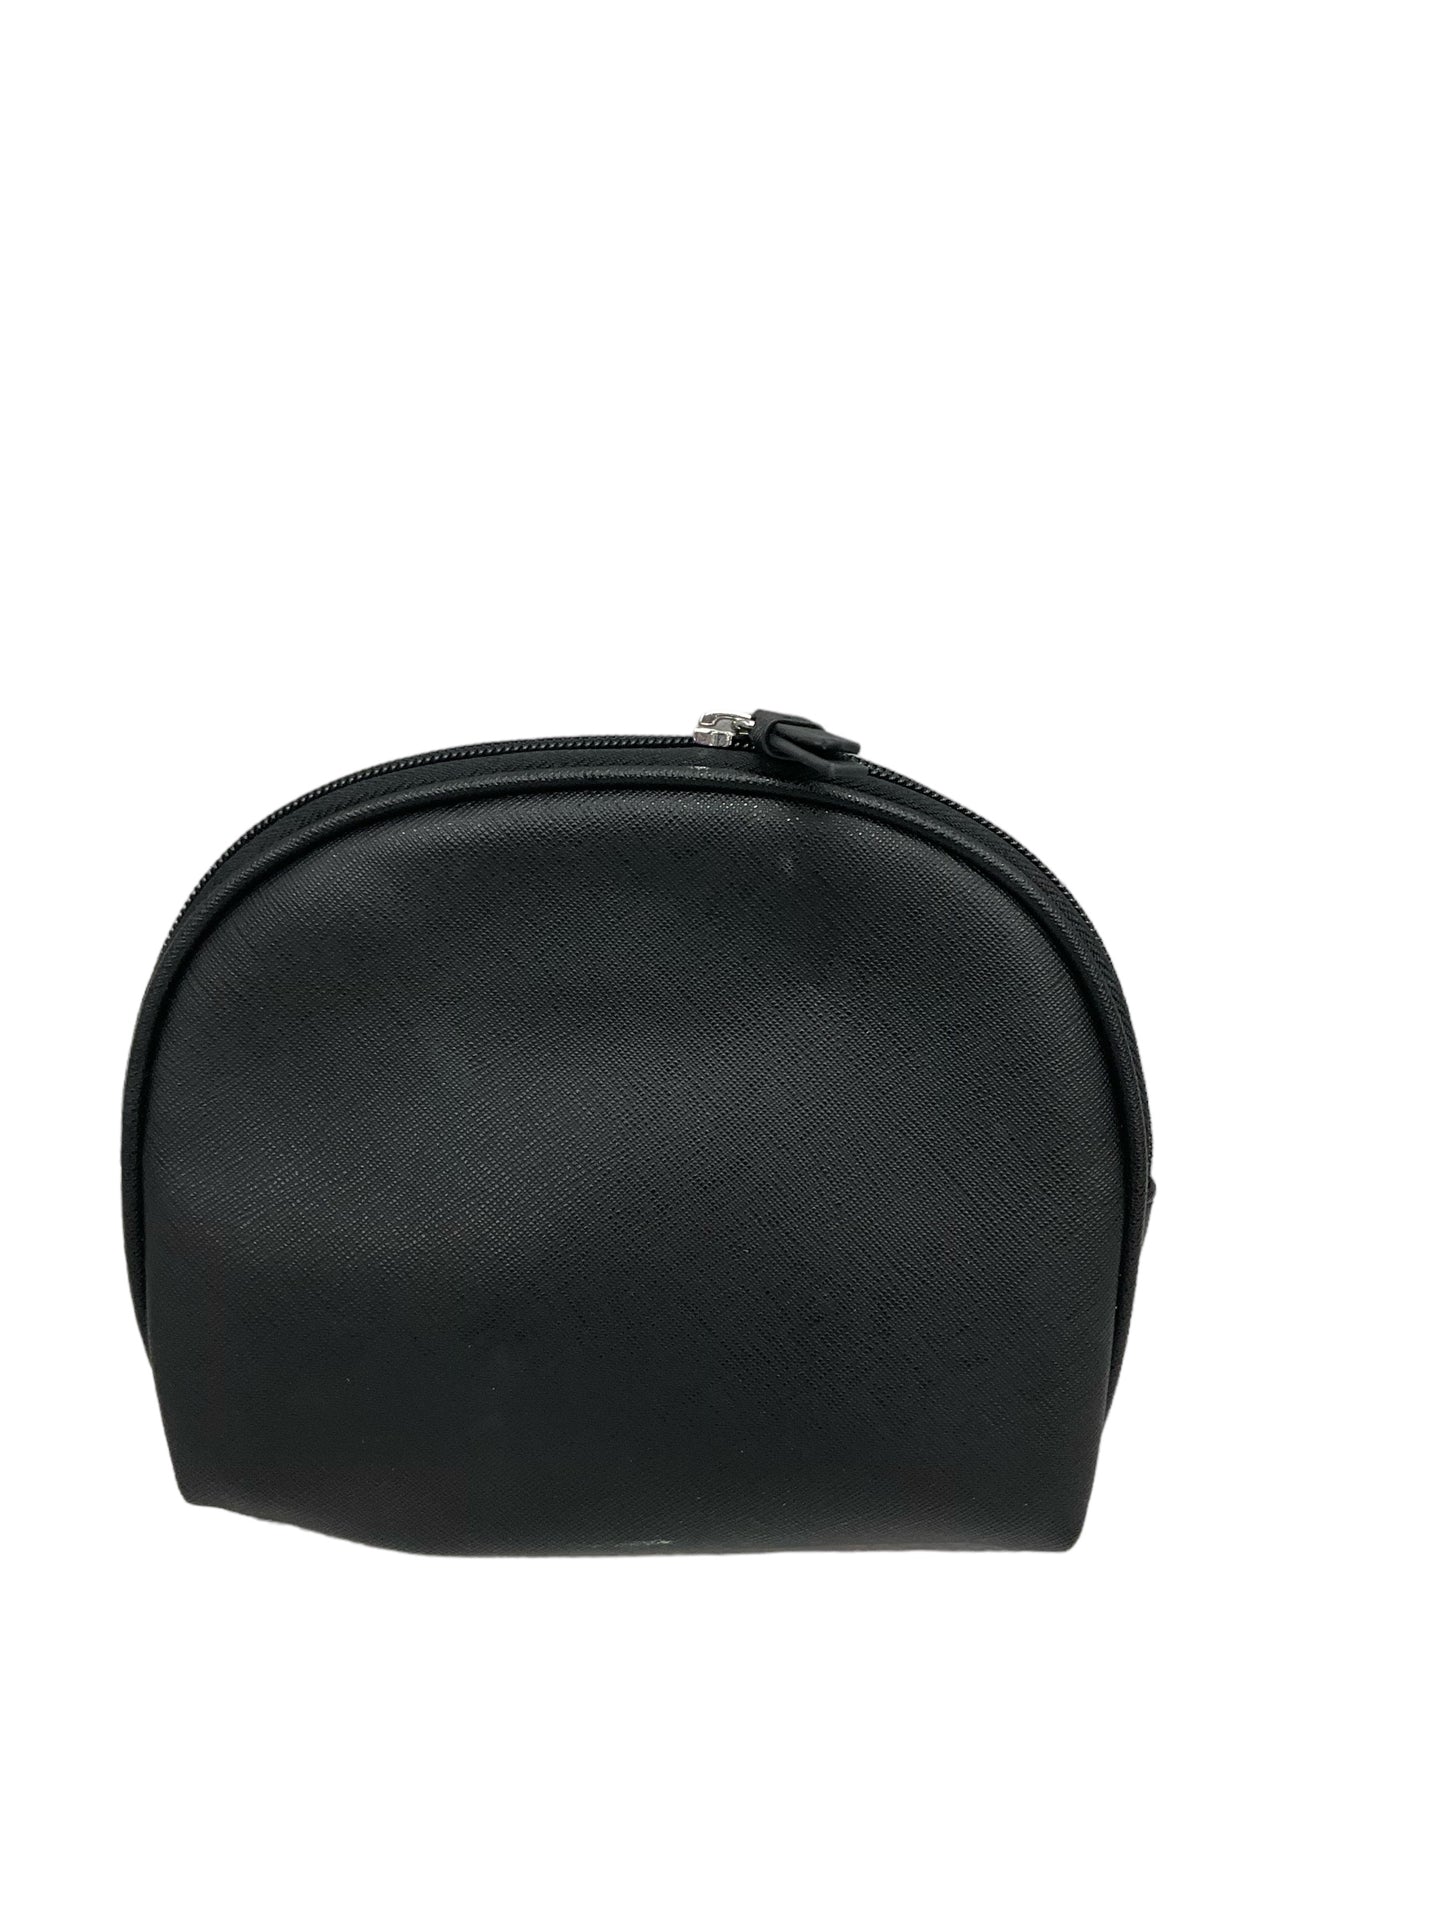 Makeup Bag By Dkny  Size: Small